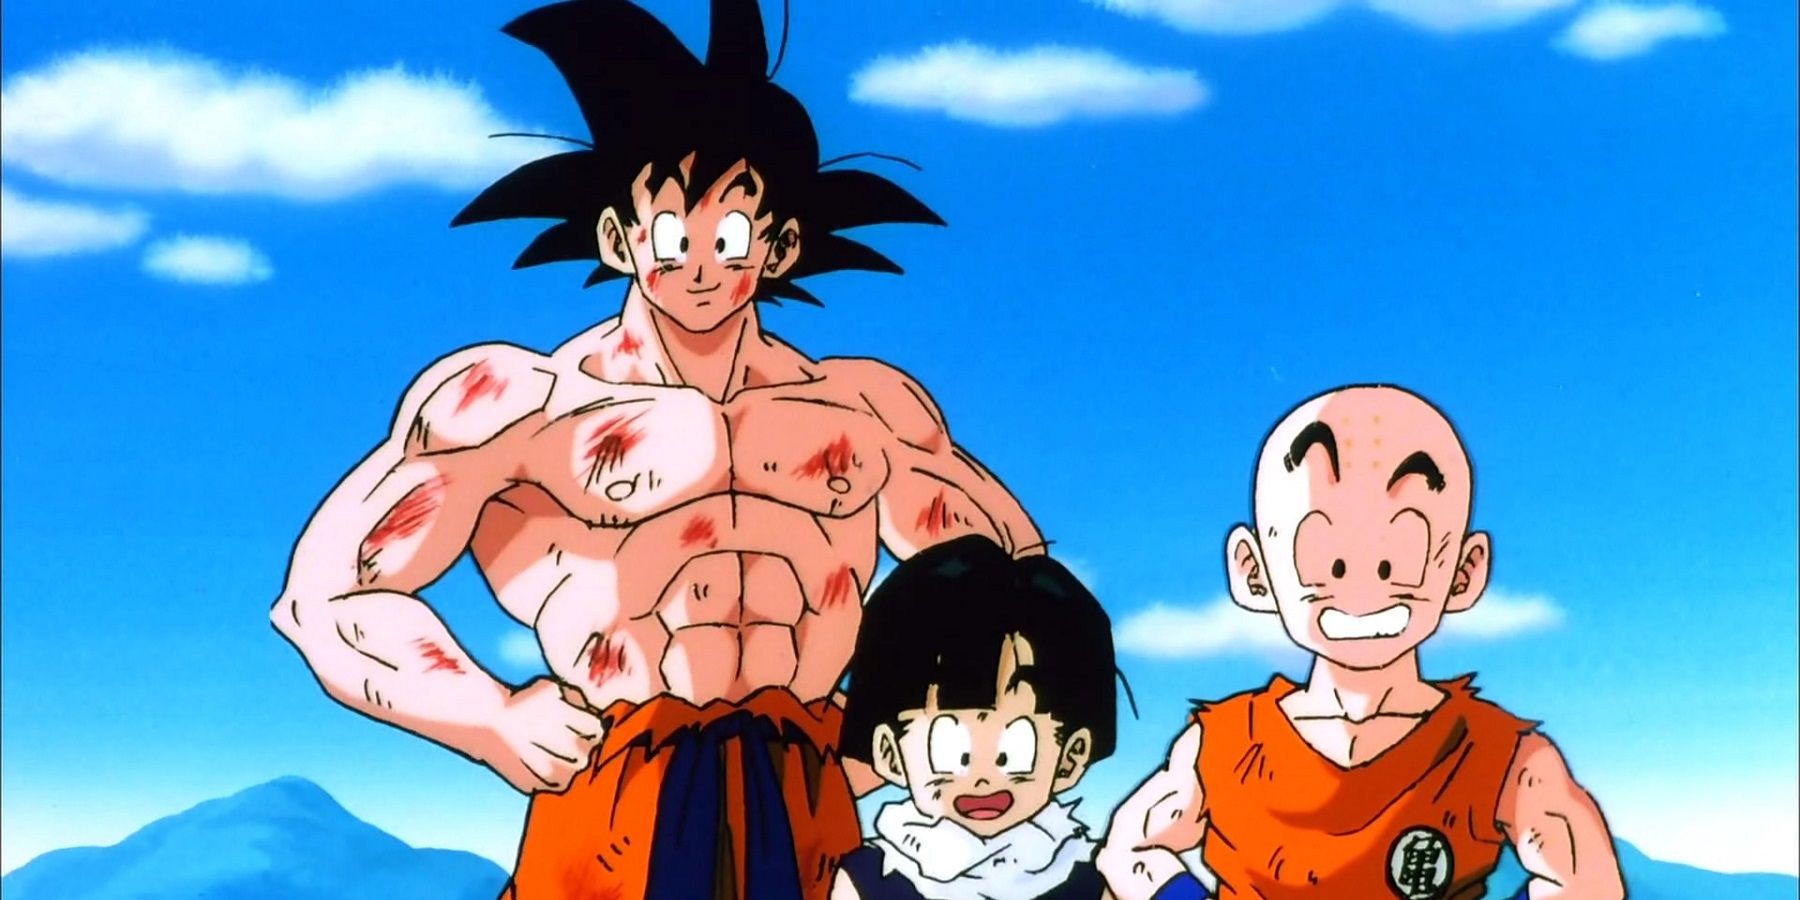 Krillin, Goku, and Gohan after a fight in Dragon Ball Z